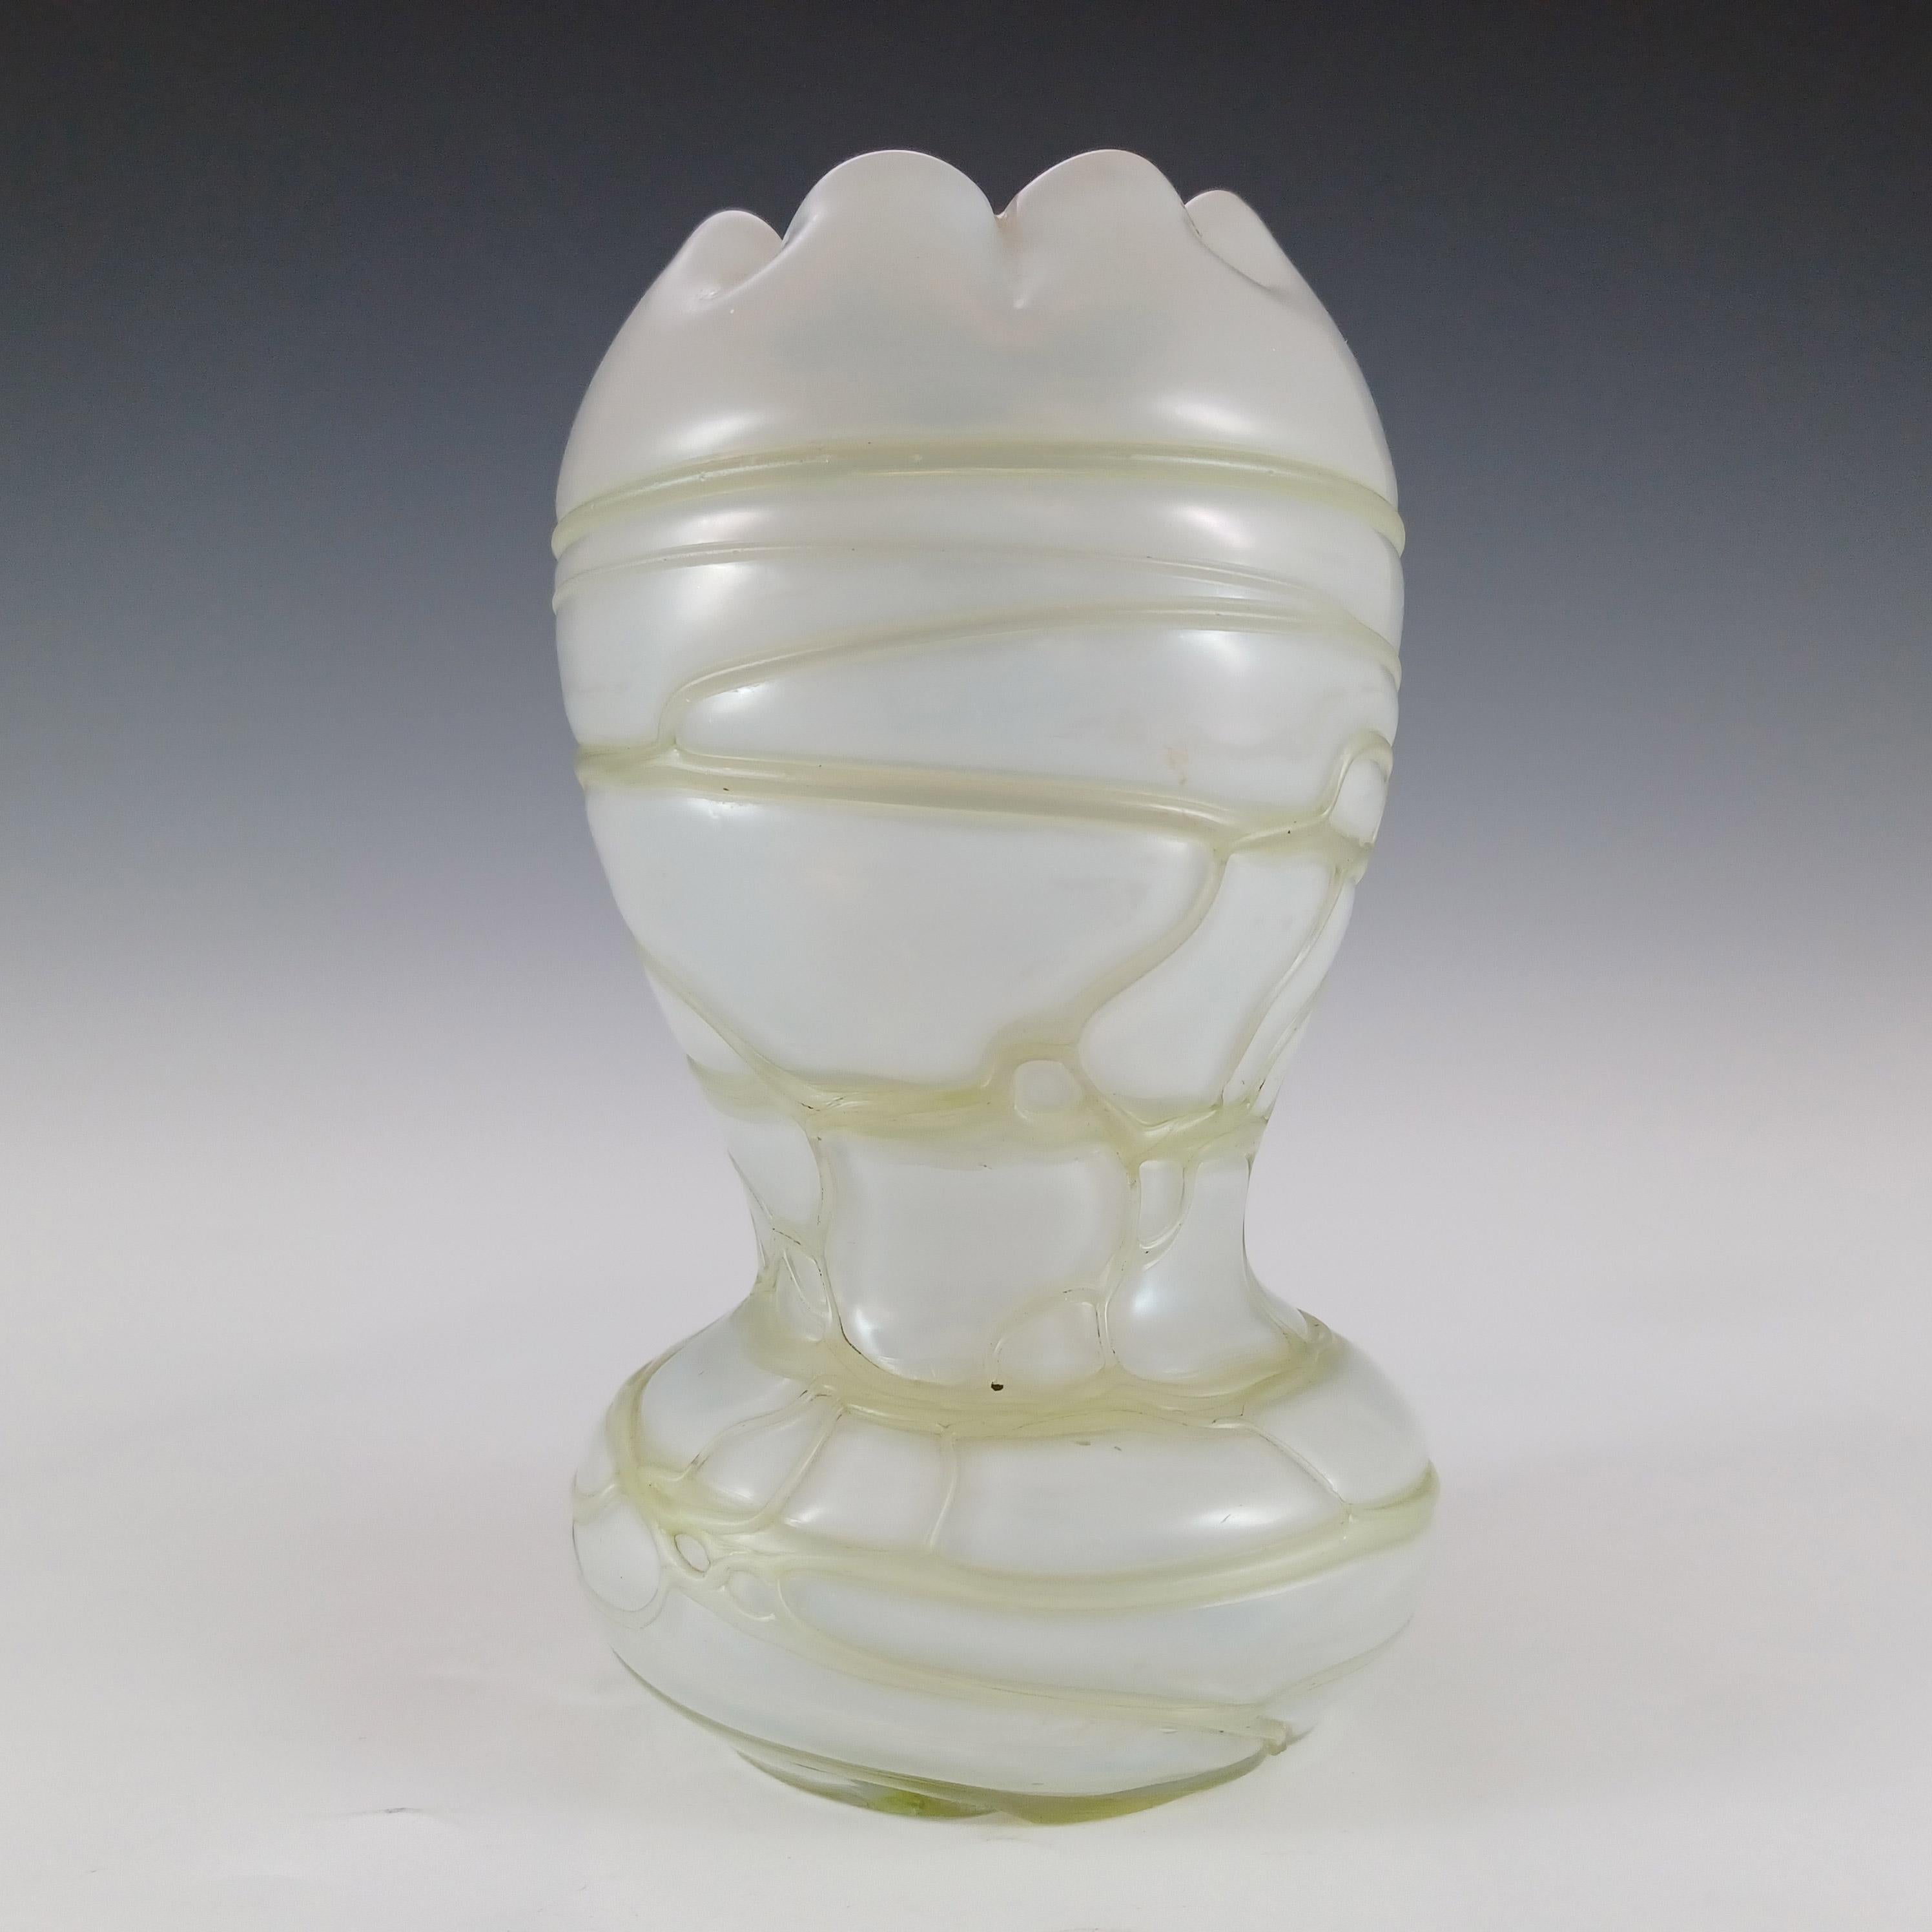 Here we have a beautiful Austrian mother-of-pearl glass vase, with applied green veined pattern and crimped rim, from the late 19th century art nouveau period. Made by Kralik, this shape in a different pattern is shown on the Kralik